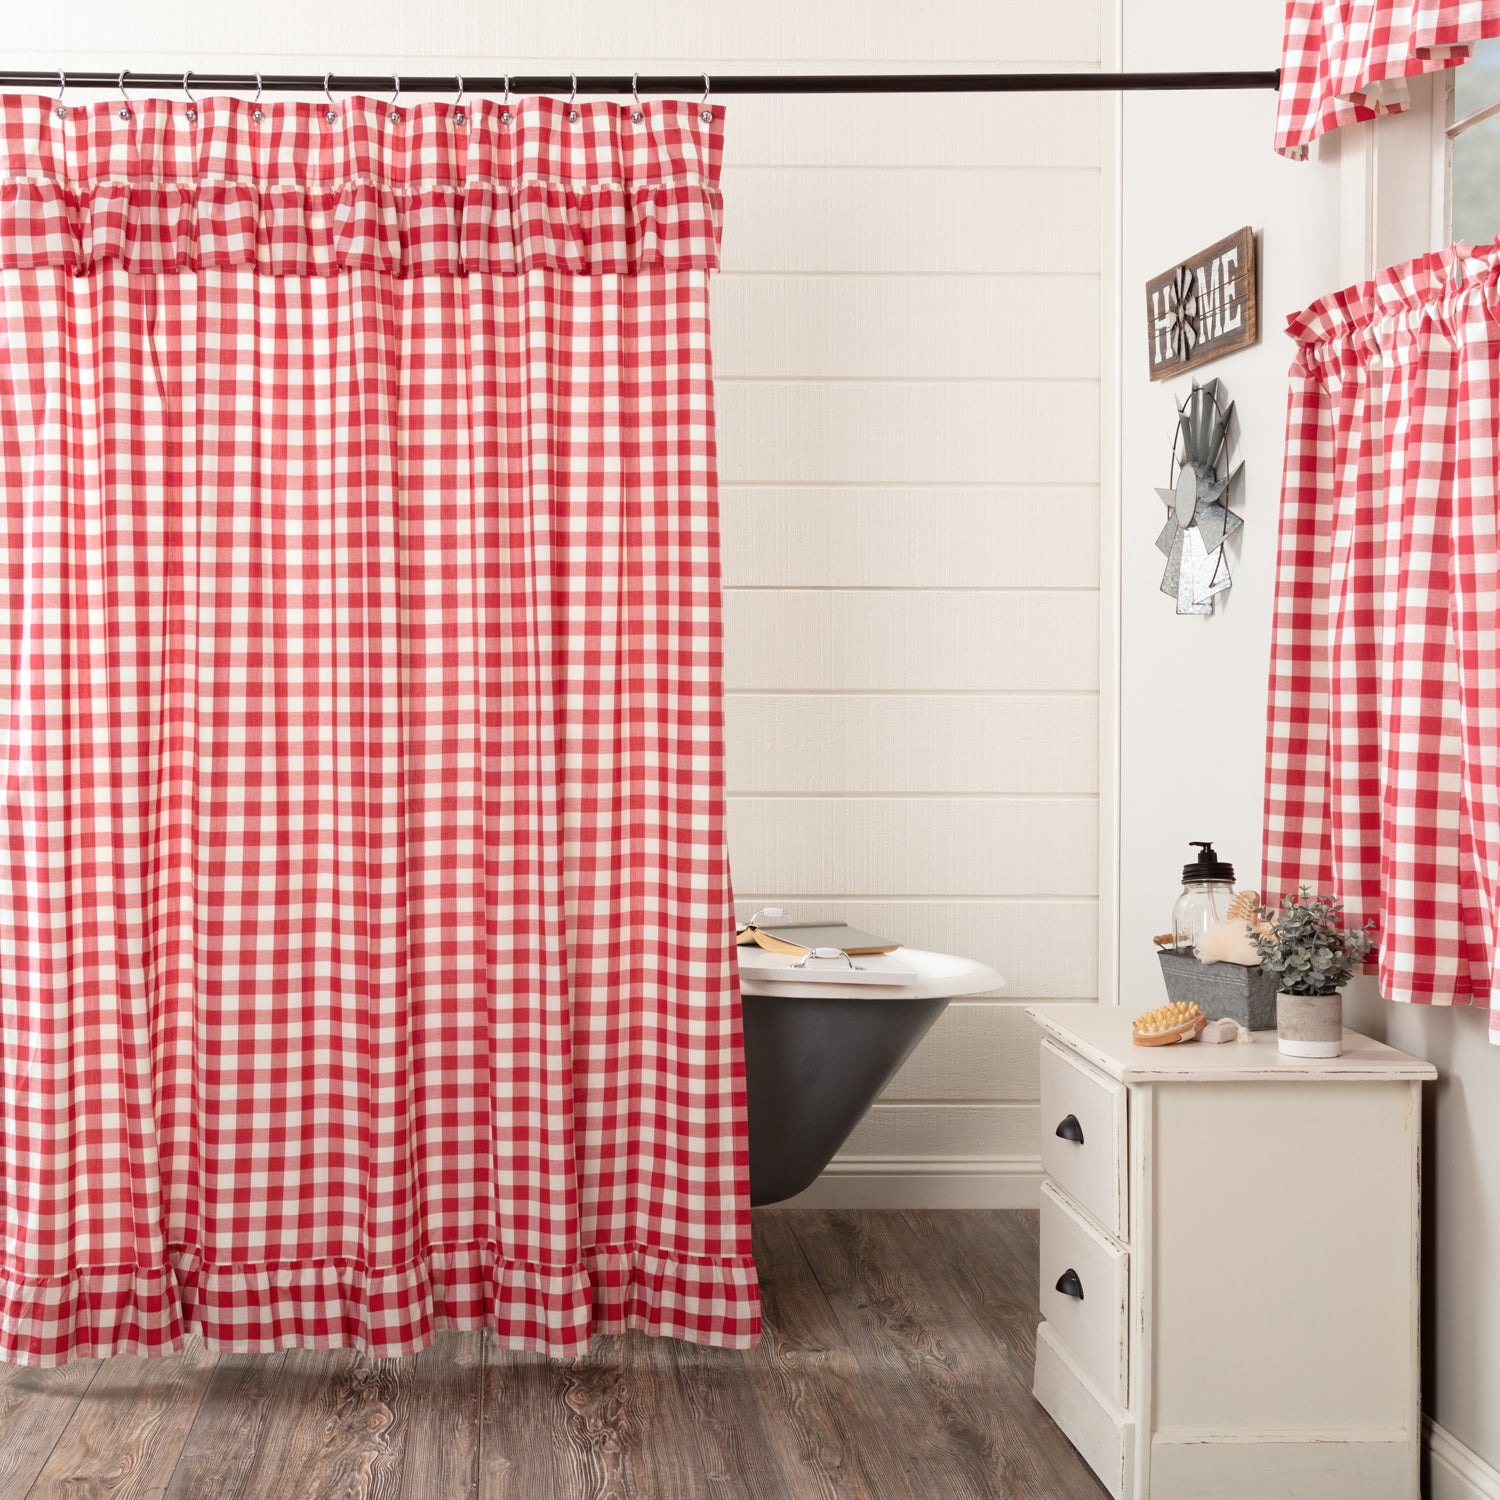 51123-Annie-Buffalo-Red-Check-Ruffled-Shower-Curtain-72x72-image-5